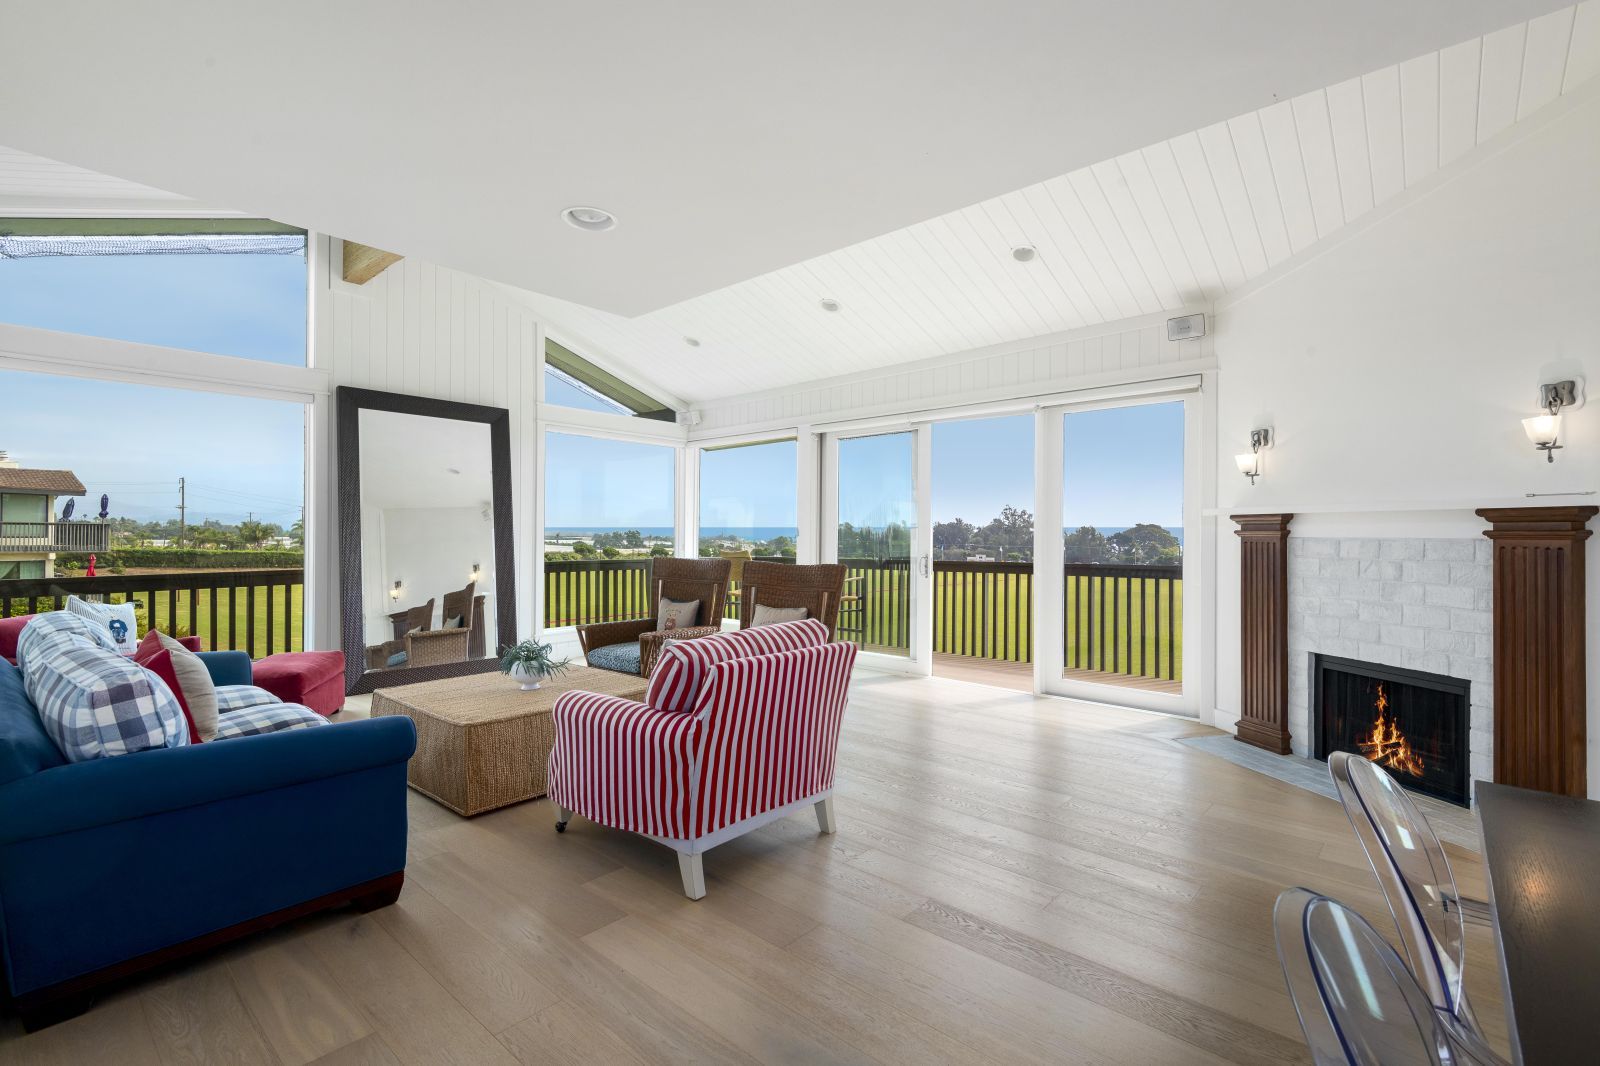 The spacious living room of a Santa Barbara Polo Club condo, with fireplace and ocean view